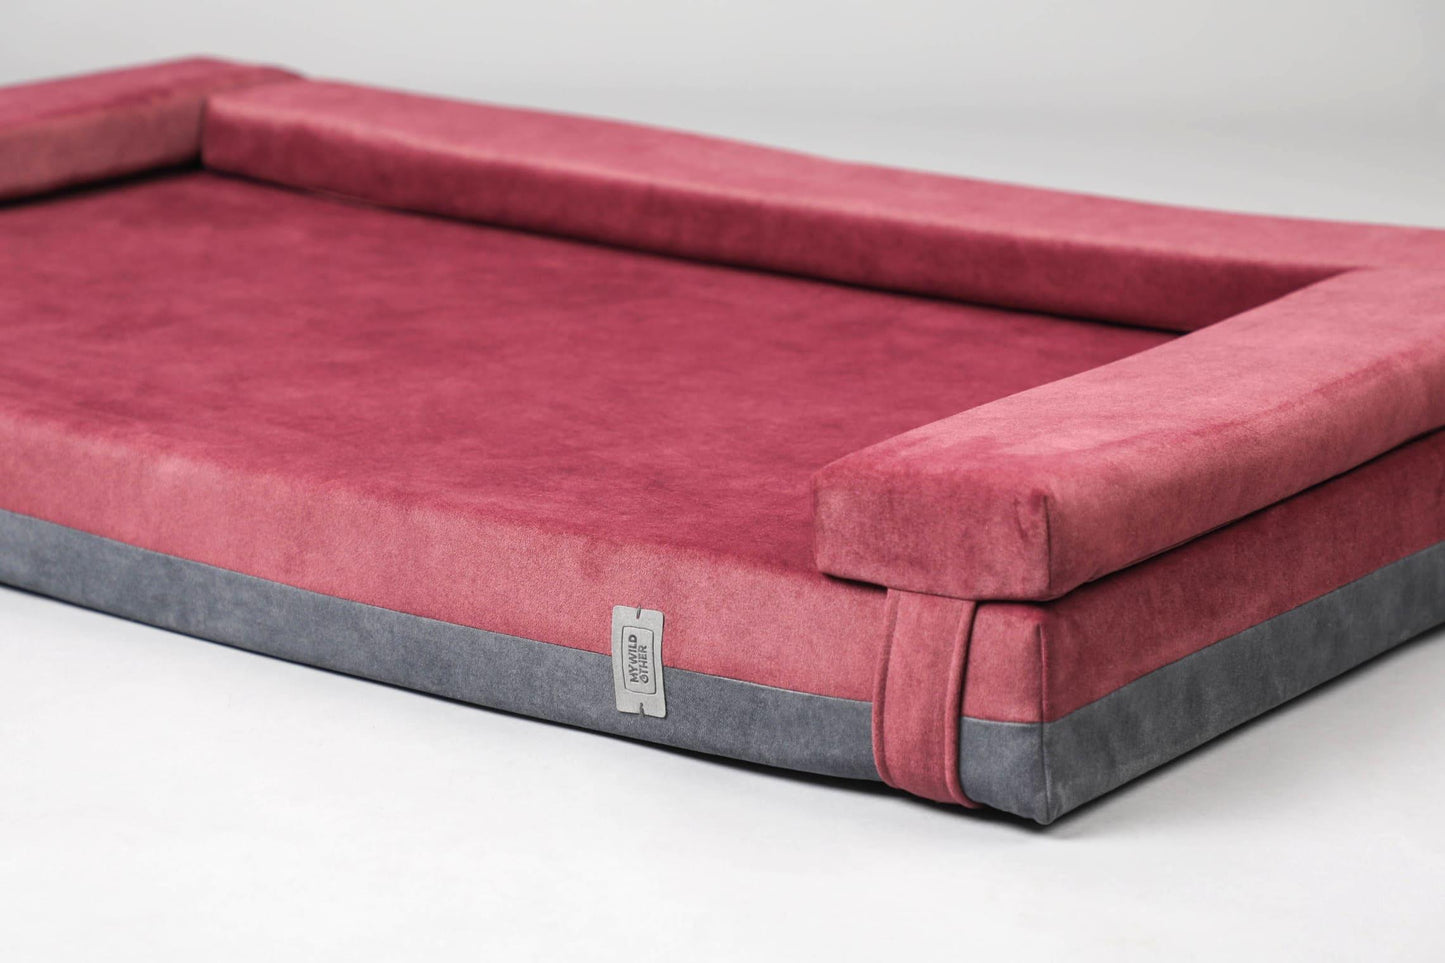 Transformer dog bed | Extra comfort & support | 2-sided | WINE RED+STEEL GREY - premium dog goods handmade in Europe by My Wild Other